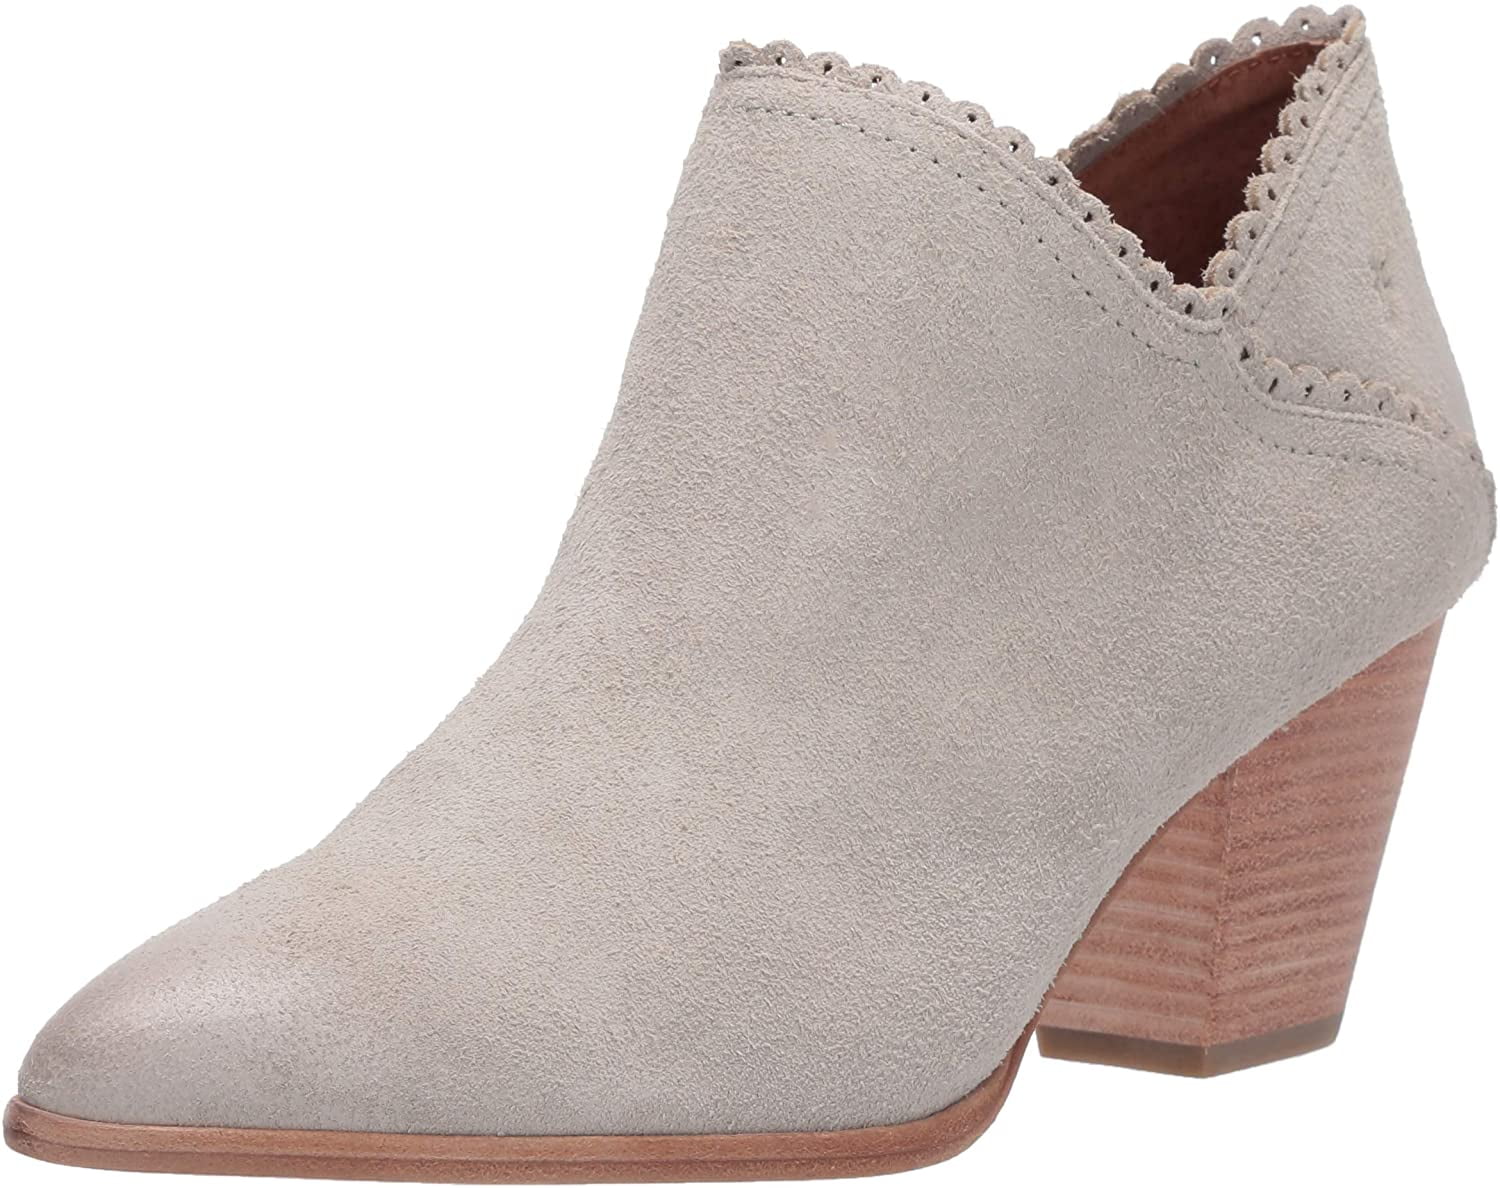 Frye Women's Reed Scallop Shootie Ankle Boot, White Sky, 6 M US ...